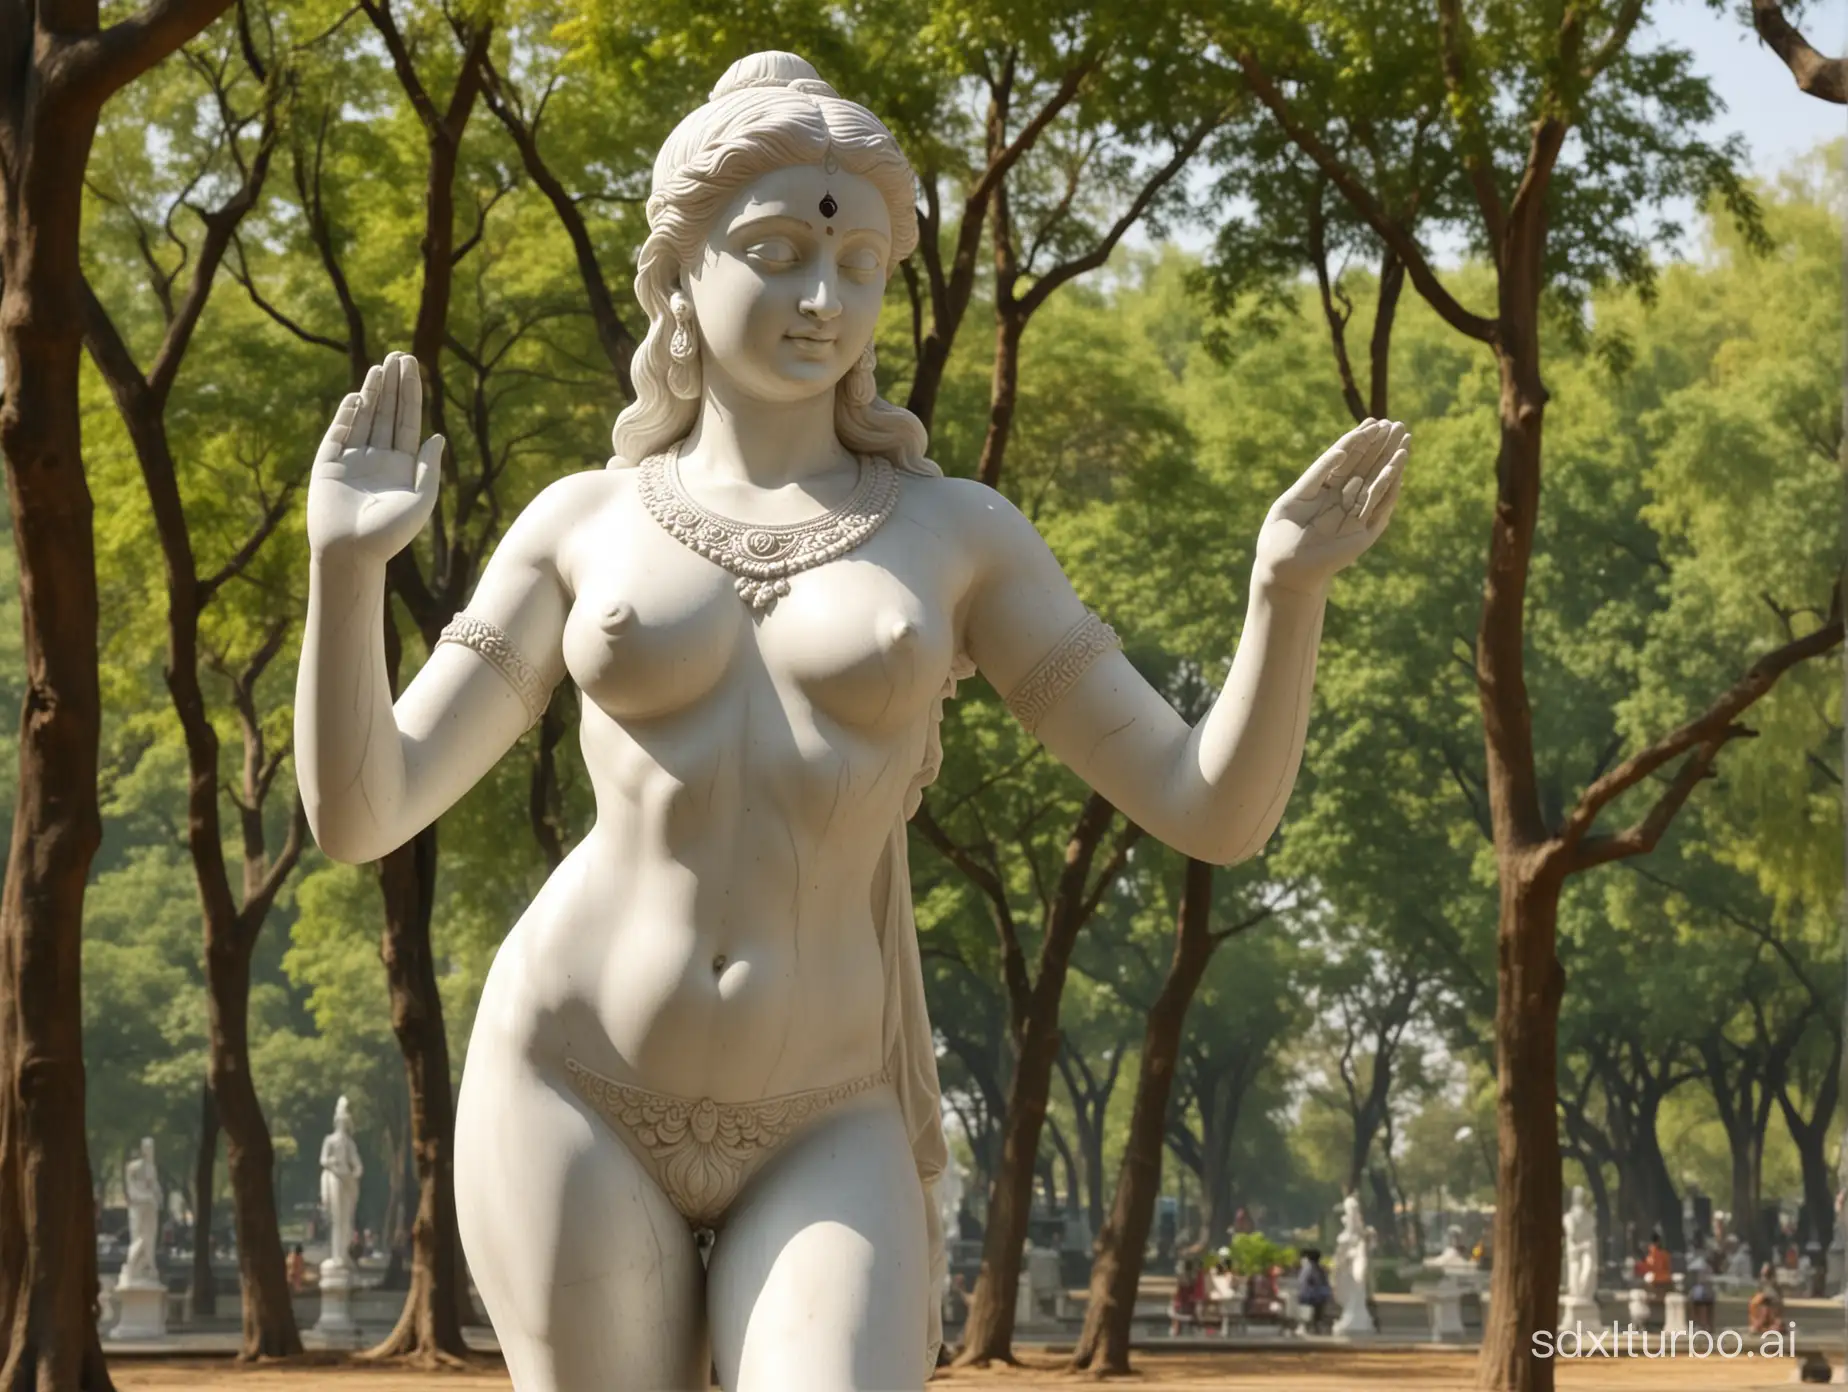 classical Hindu statue, marble statue, naked girl statue, marble statue, Hindu statue, nude body, standing full-length in Indian park, side view, legs spread wide, close-up, background Indian park, sunny weather, marble statue, Hindu goddess, statue, marble statue, girl statue, close-up, 4K, marble skin, classical Hindu face,